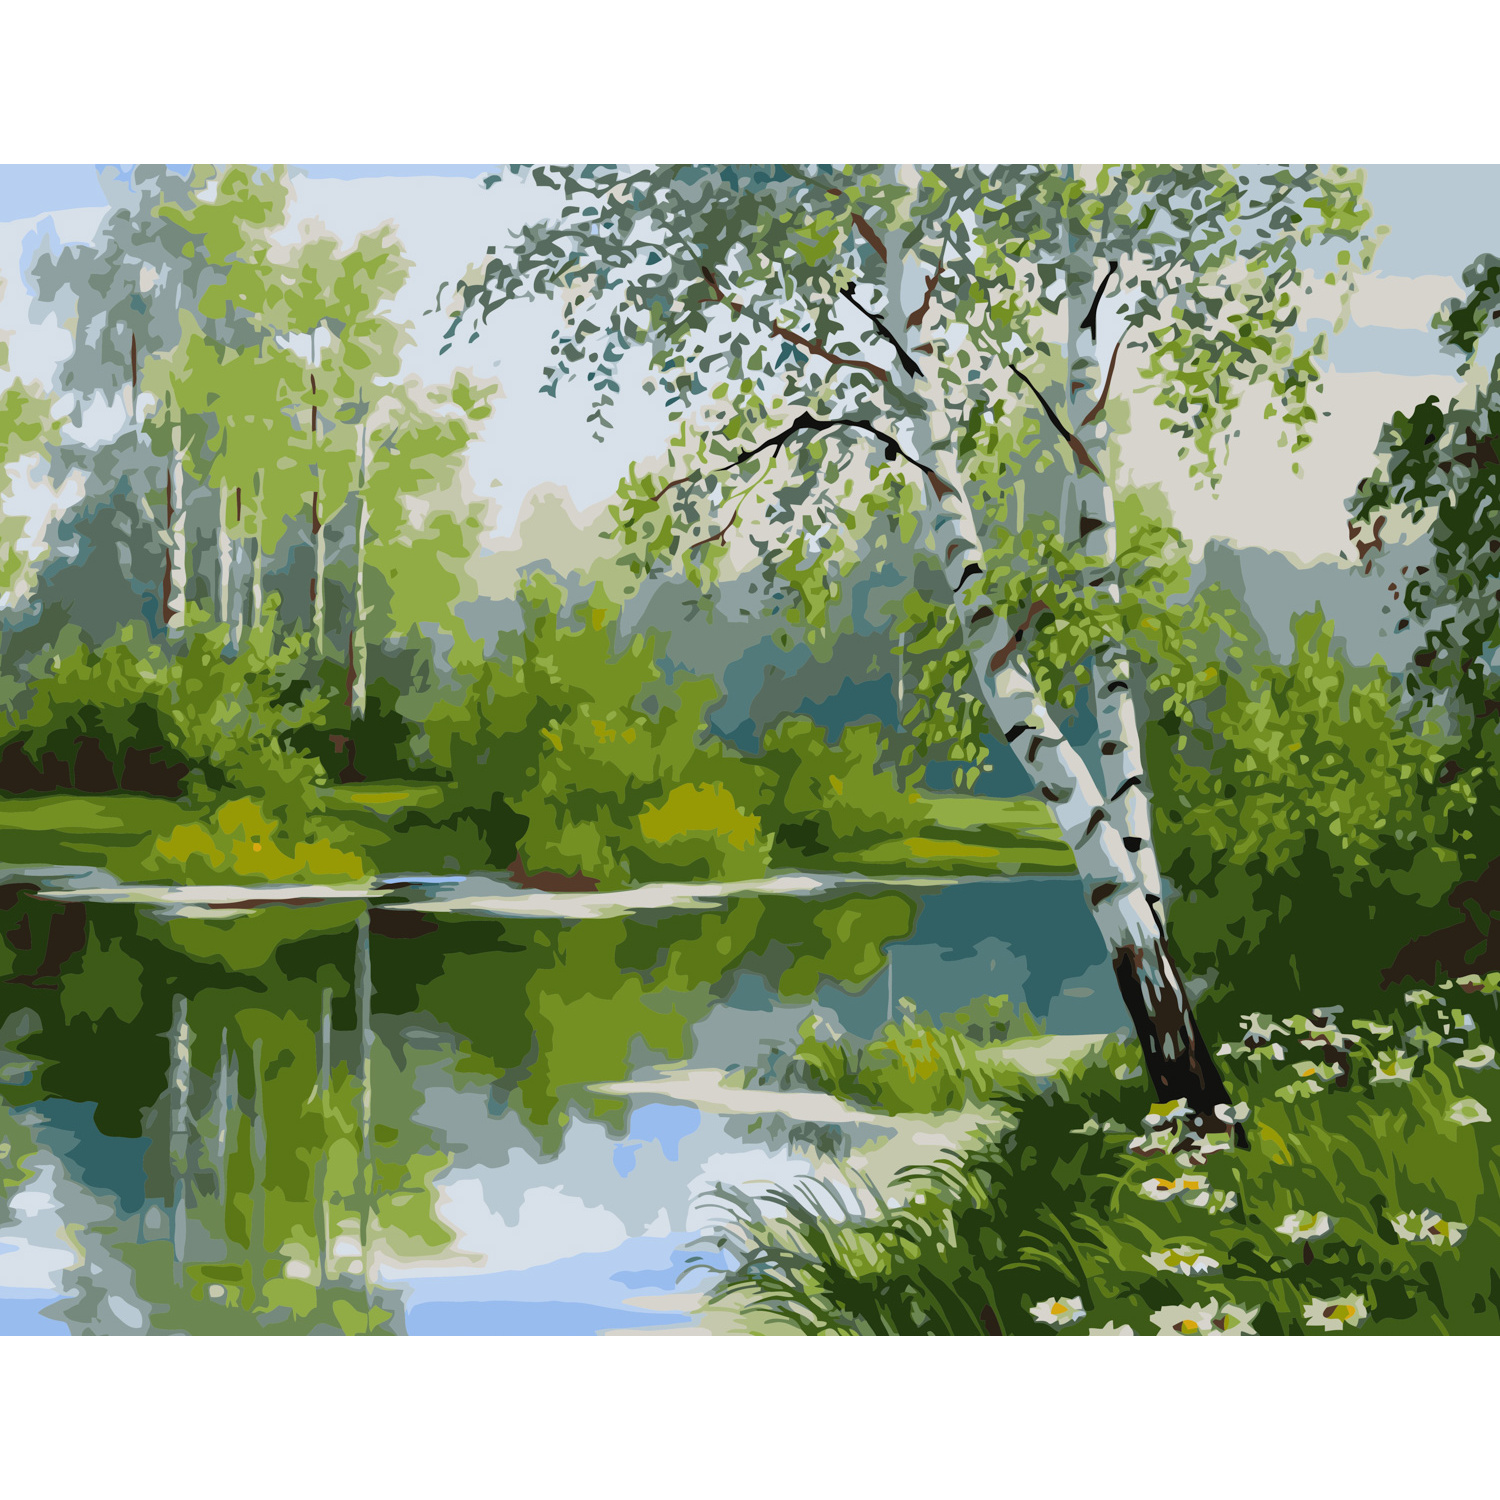 Picture by numbers Strateg PREMIUM Березова роща with varnish and a level size 40x50 cm VA-0592